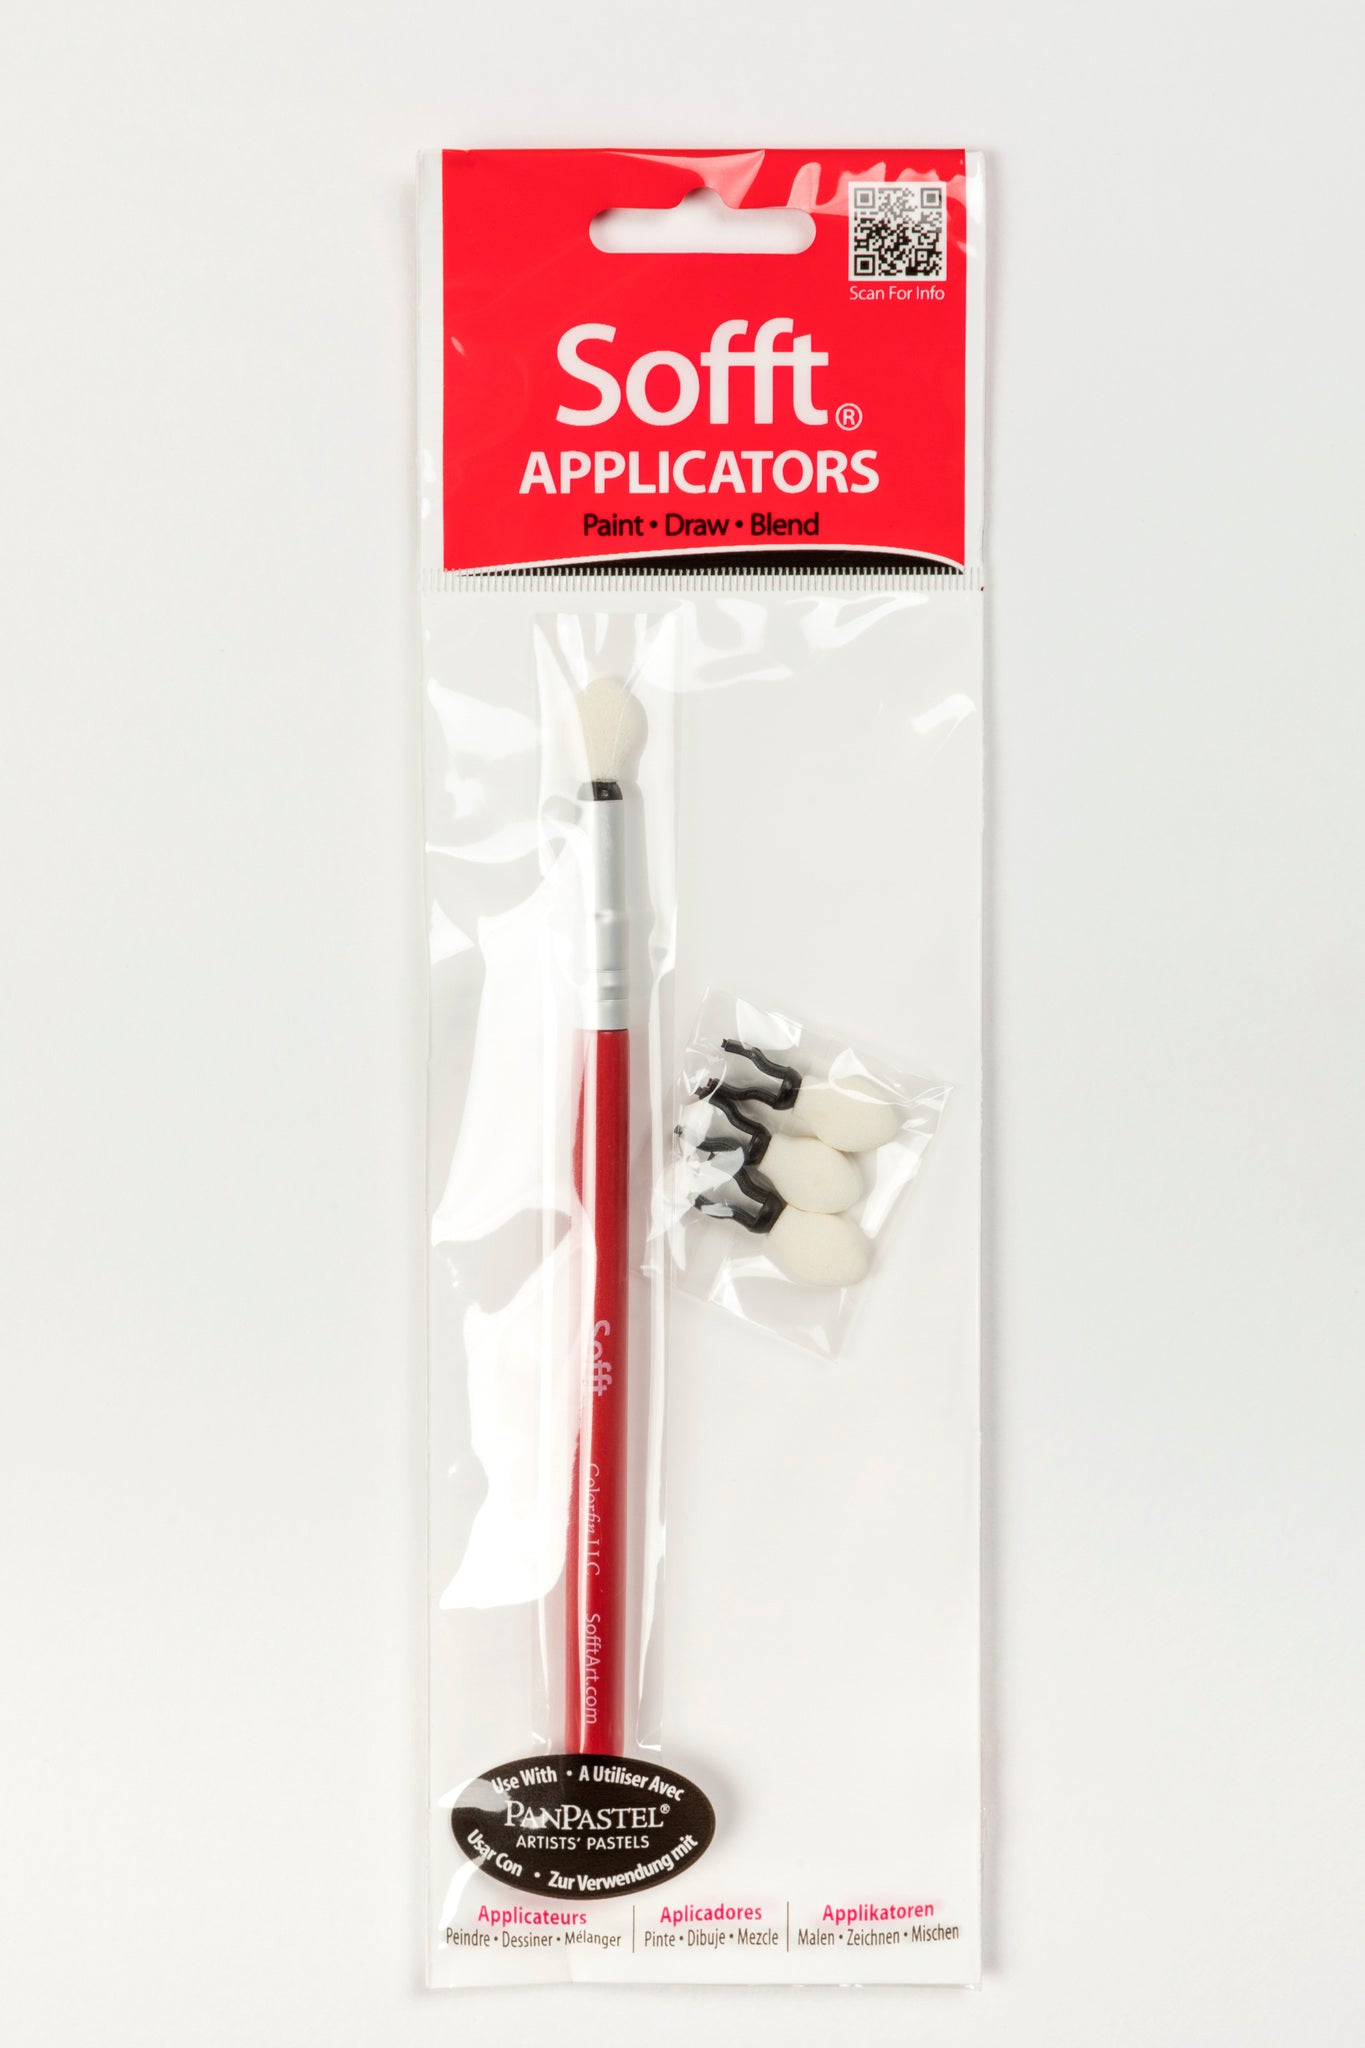 PanPastel Sofft tools Soft Applicator 63070 - Applicator & Replacement Heads